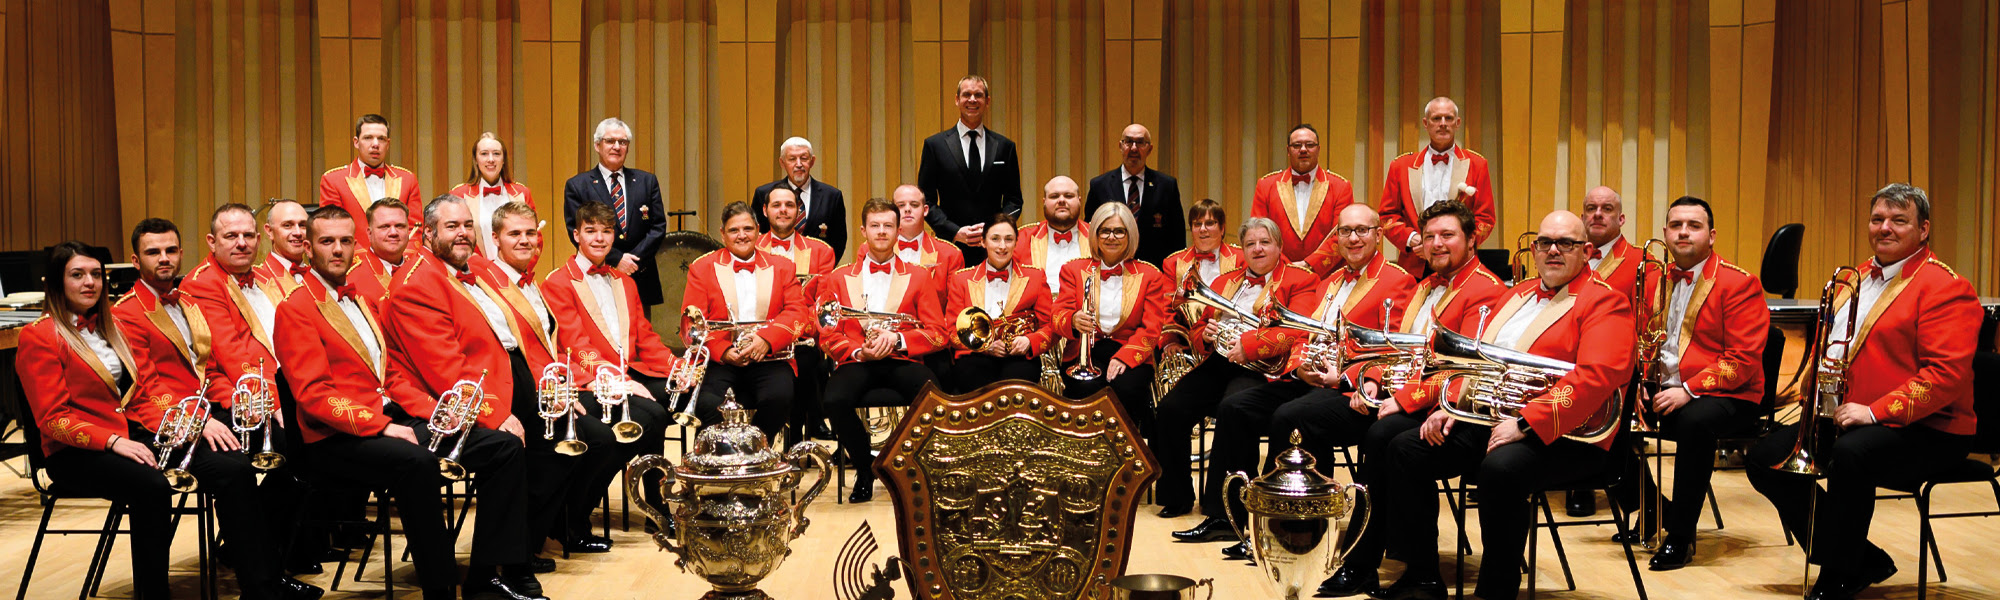 Cory Band in hall with instruments and award